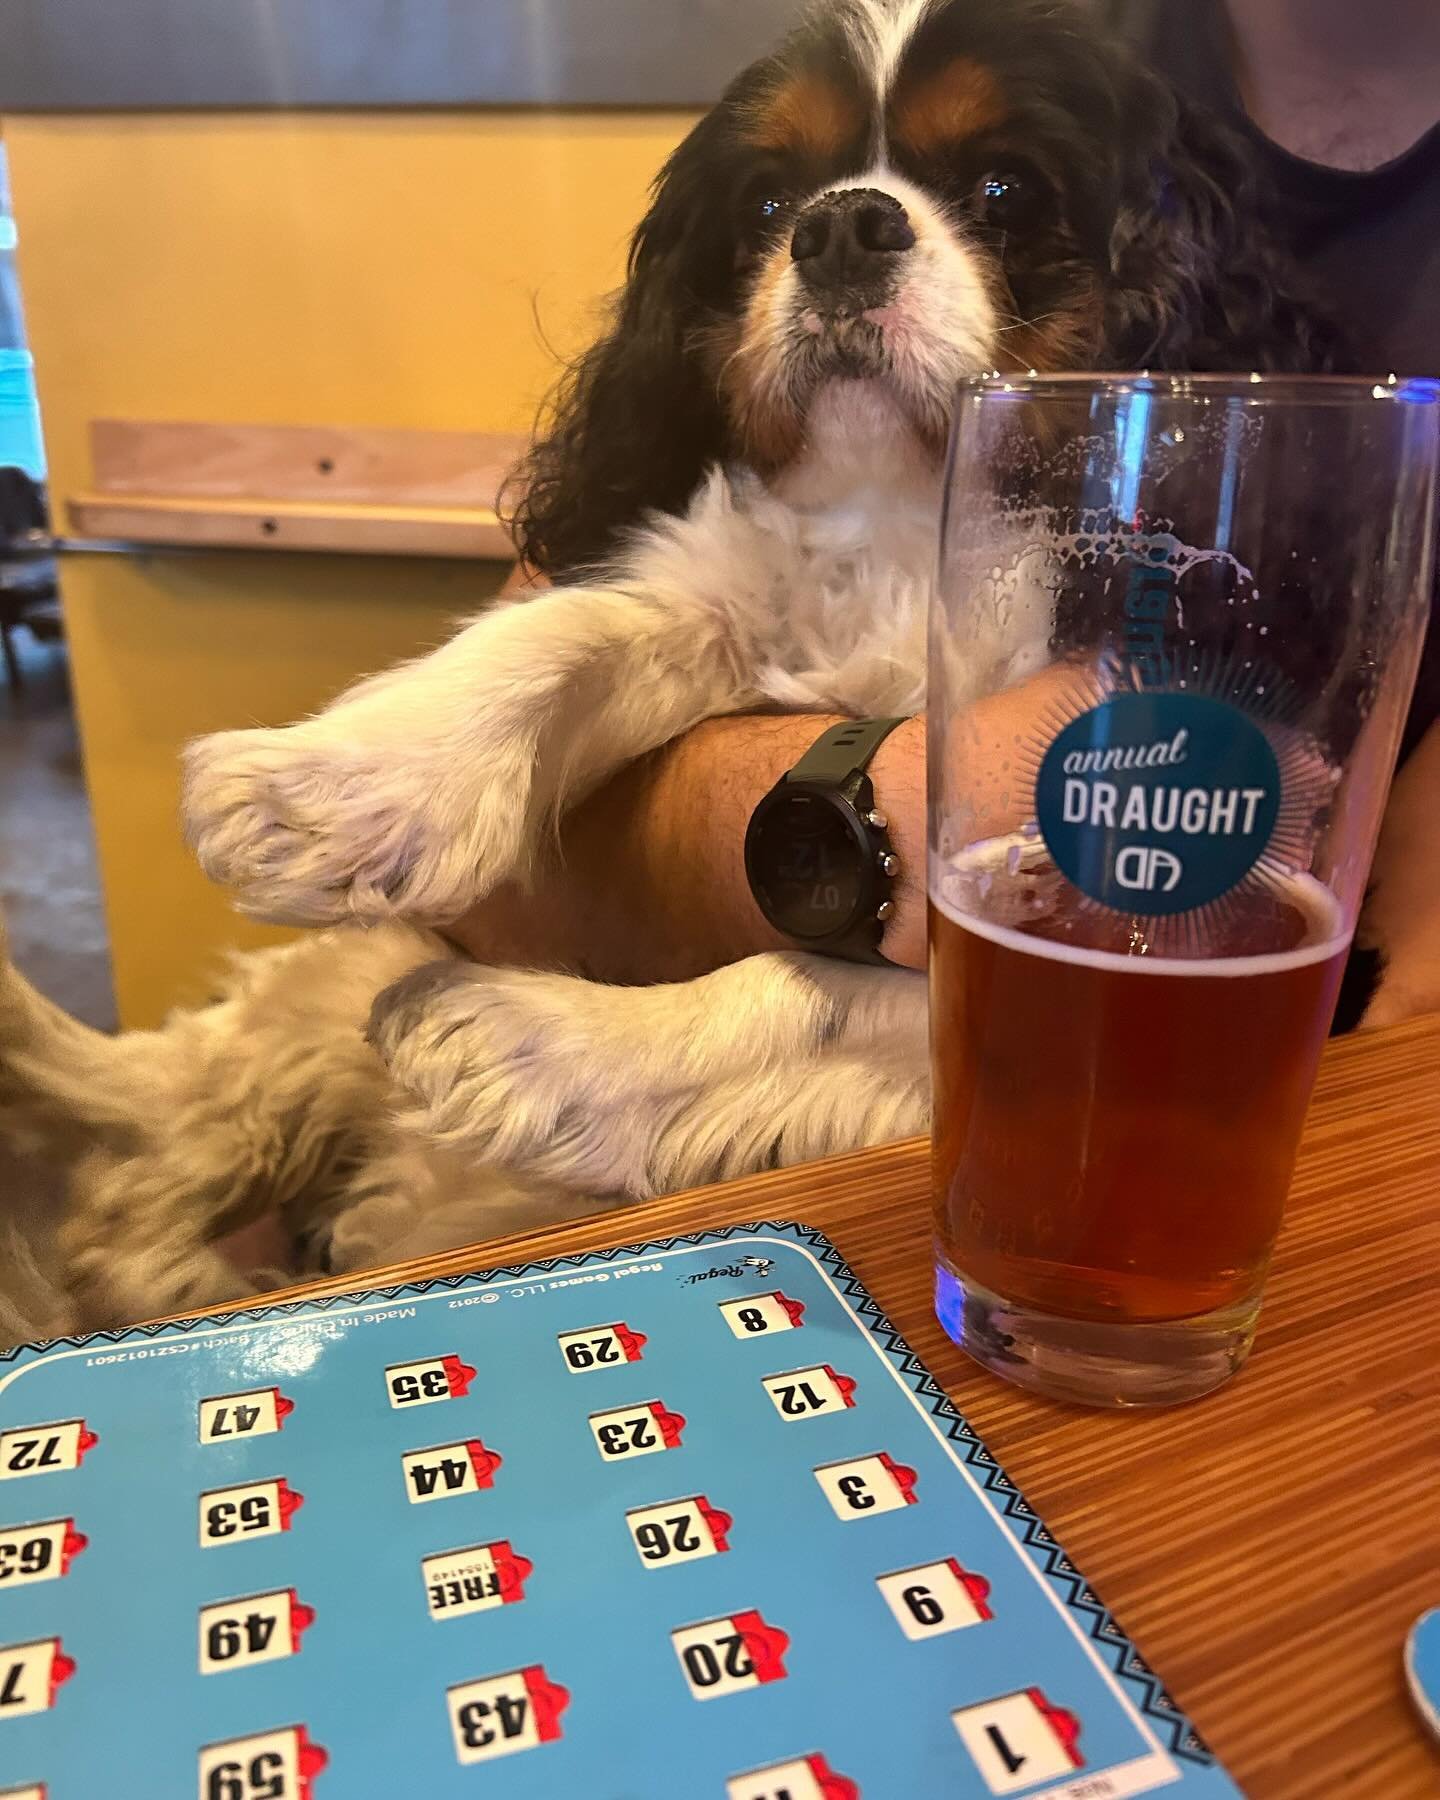 BINGO! (The game, not the dog) The fun starts at 6:30pm. Free to play. Dog bones provided. 

@elfogonpurepecha cooking up dinner starting at 4:30pm.  Come enjoy a pint, good food and the great weather!
.
.
.
#bingo #dabingo #tacos #bingoandbeer #gole